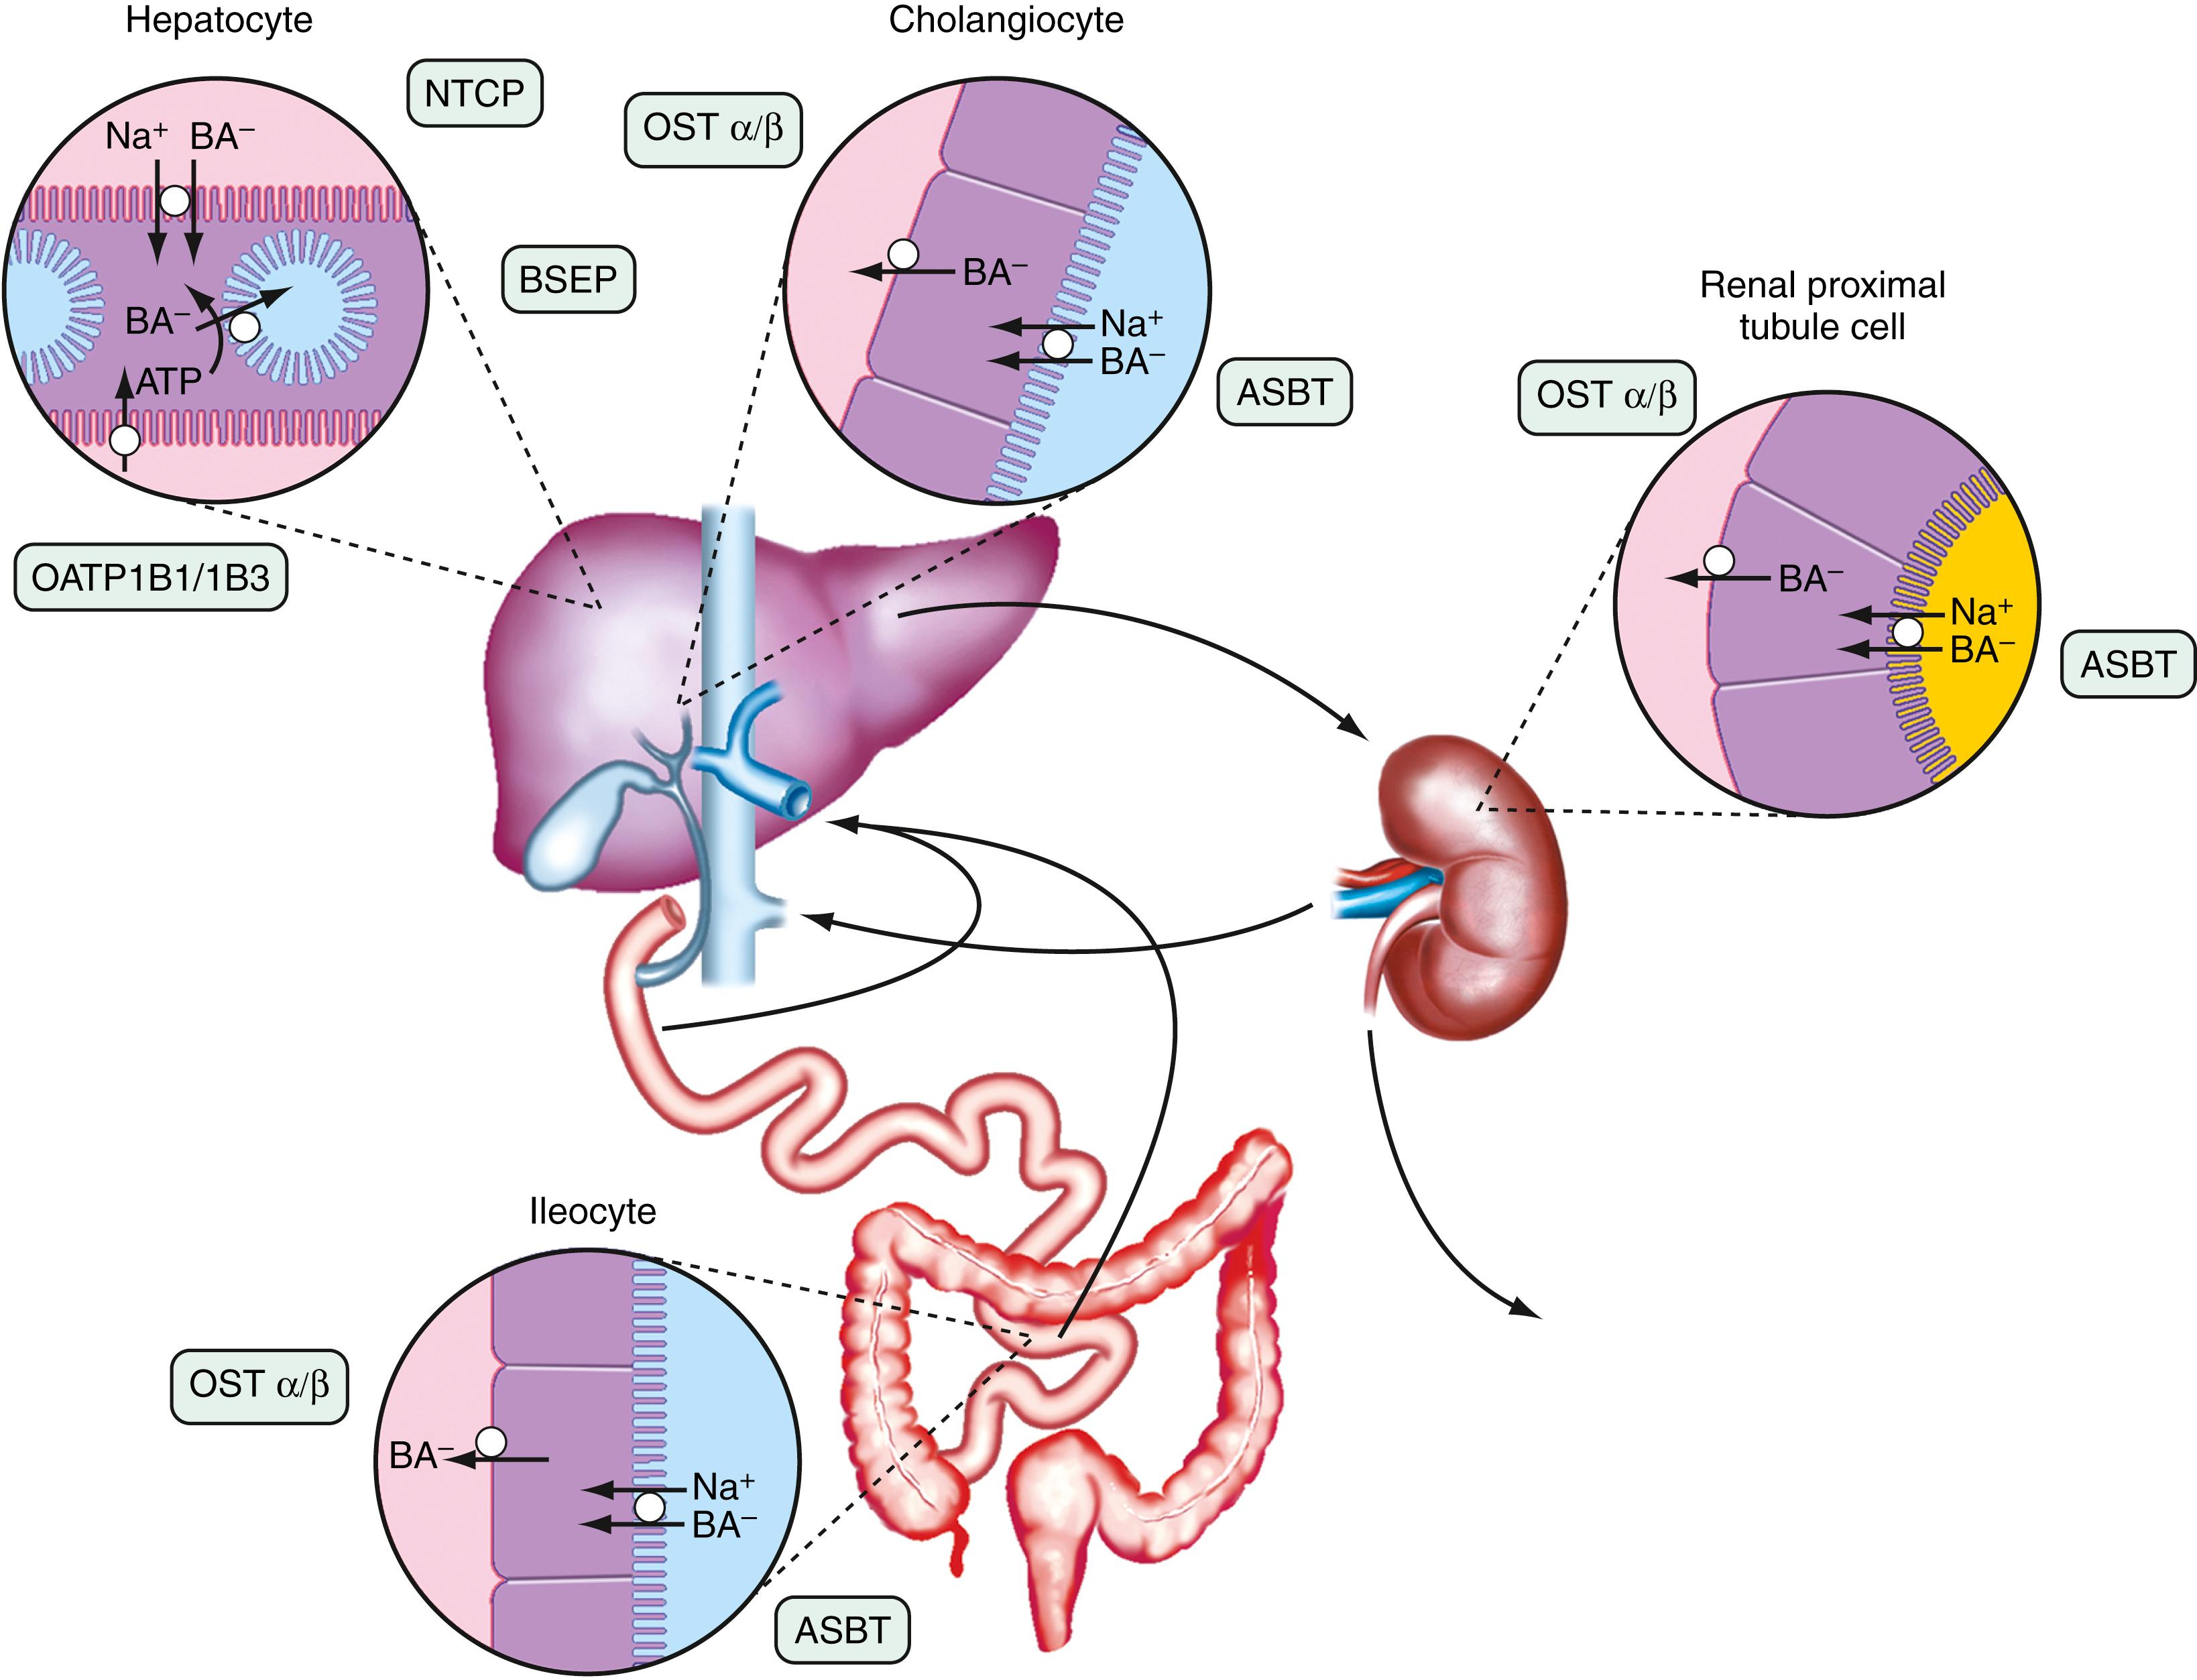 Fig. 64.3, Enterohepatic circulation of bile acids showing the individual transport proteins responsible for bile acid (BA) transport across epithelia of various cells, including hepatocytes, cholangiocytes, ileocytes (ileal enterocytes), and renal proximal tubule cells. A − , anion; ASBT (gene symbol SLC10A2 ), apical sodium bile acid transporter; BSEP (ABCB11), bile salt export pump; NTCP (SLC10A1), Na + -taurocholate cotransporting polypeptide; OATP , organic anion transporting polypeptide; OST , organic solute transporter.